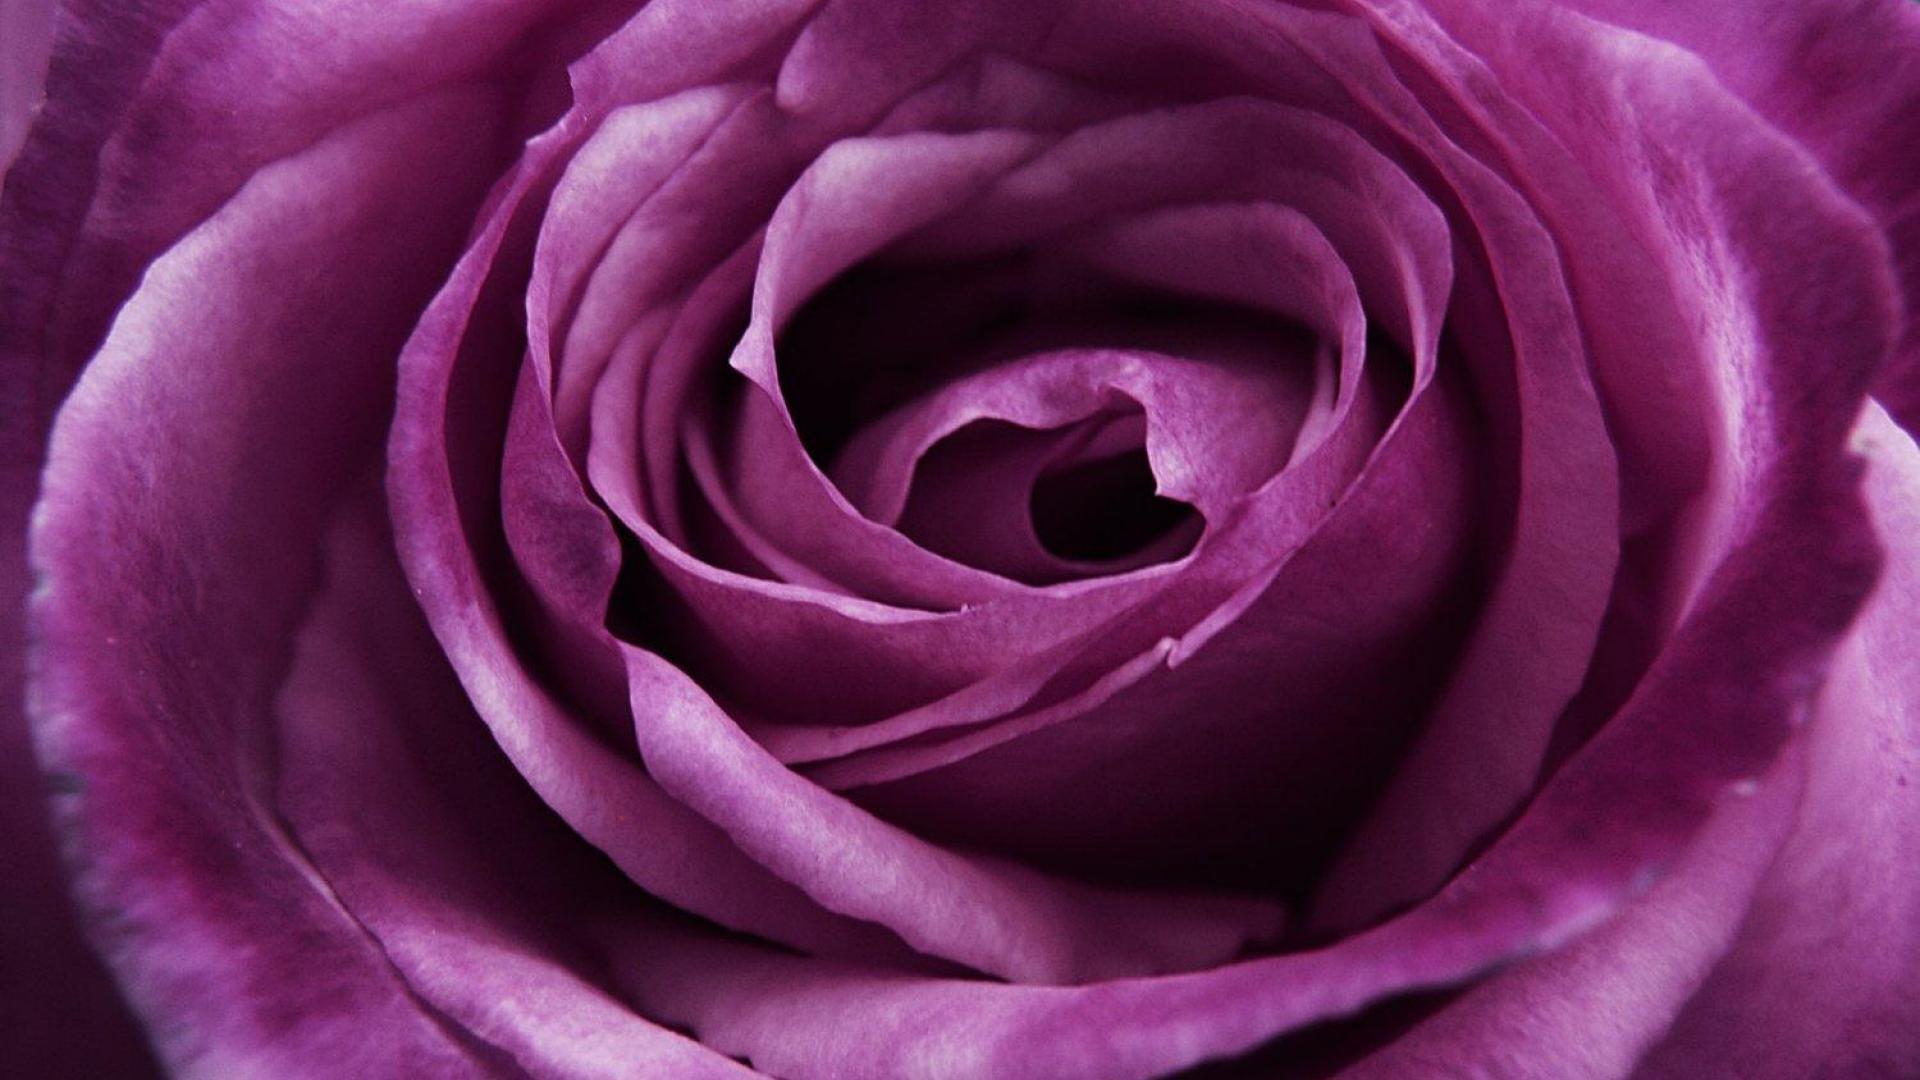 Big Purple Rose Close Up Wallpaper And Image Pictures